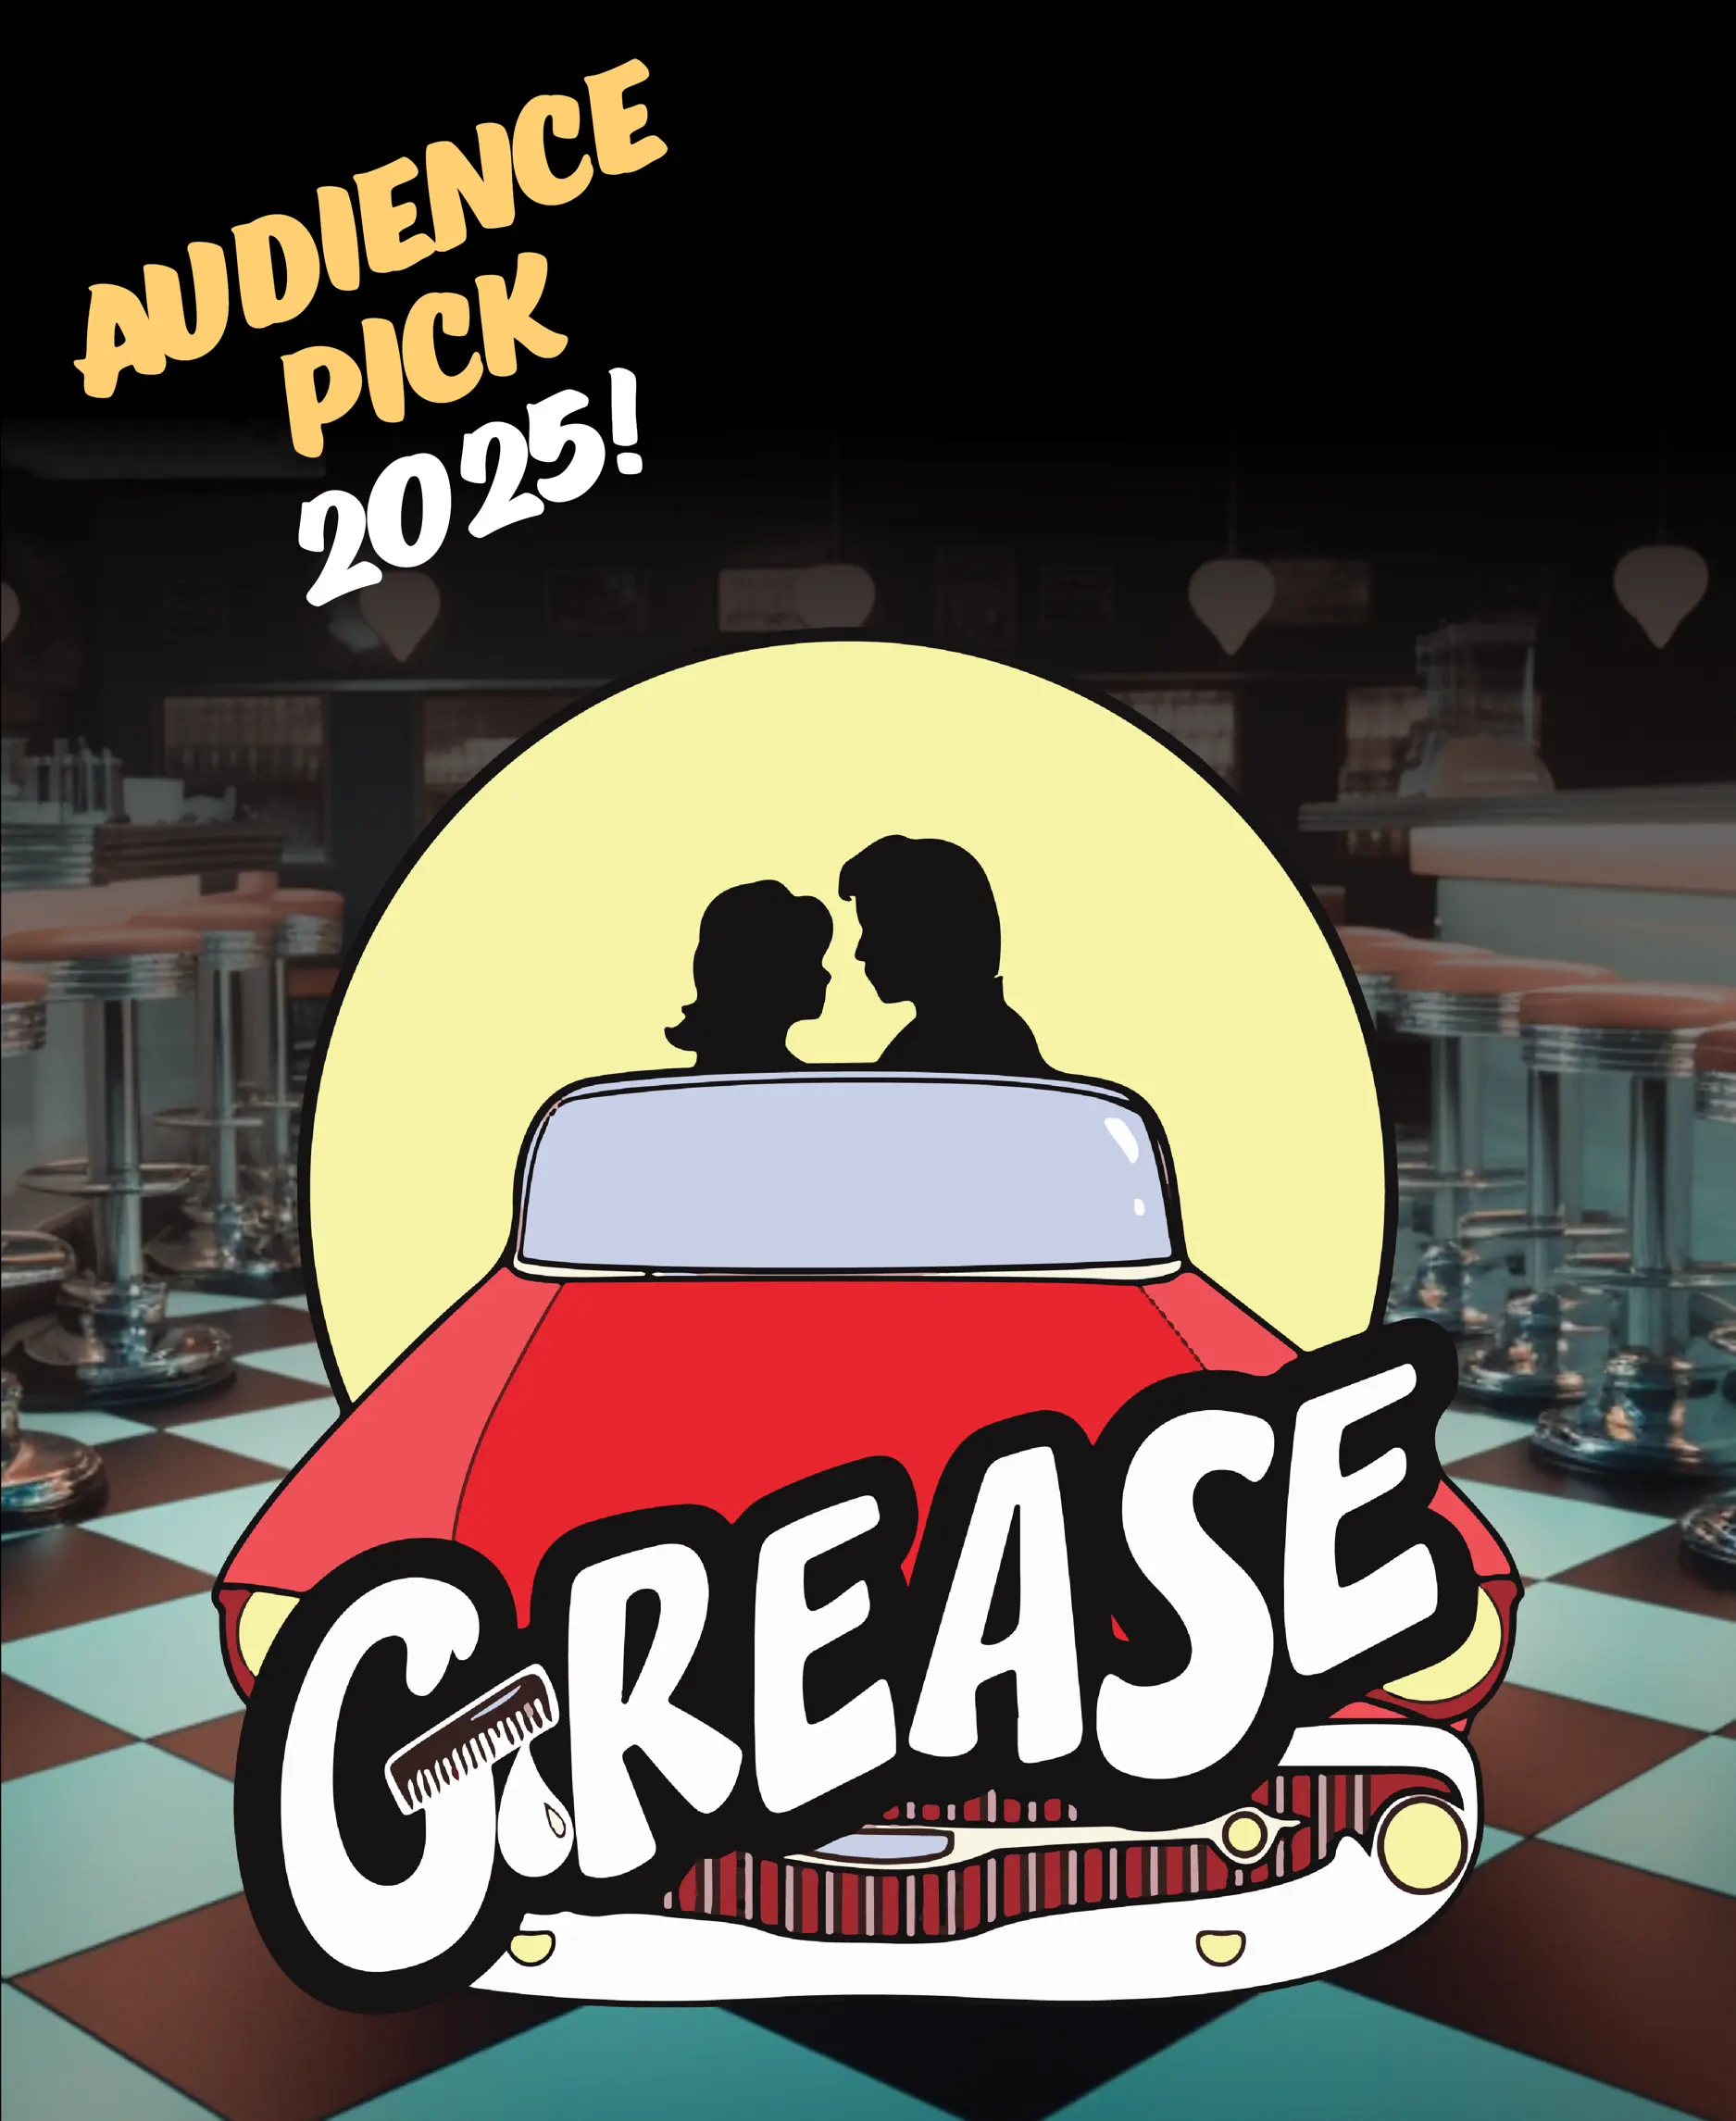 Grease show tickets honolulu events